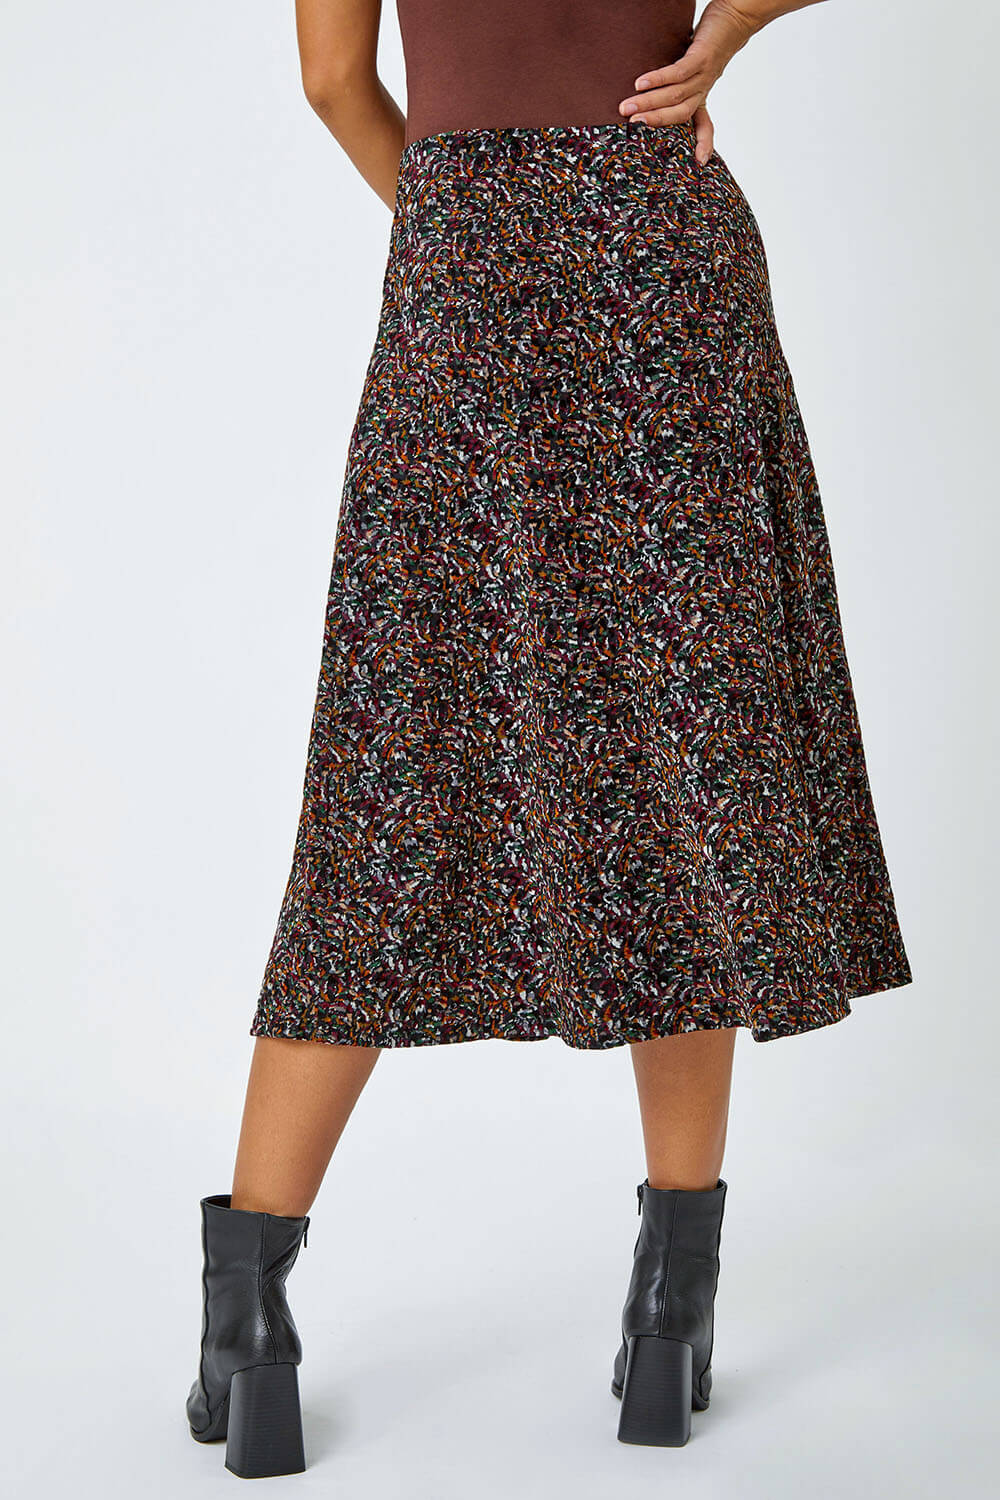 Multi  Textured Abstract Print Stretch Skirt, Image 3 of 5